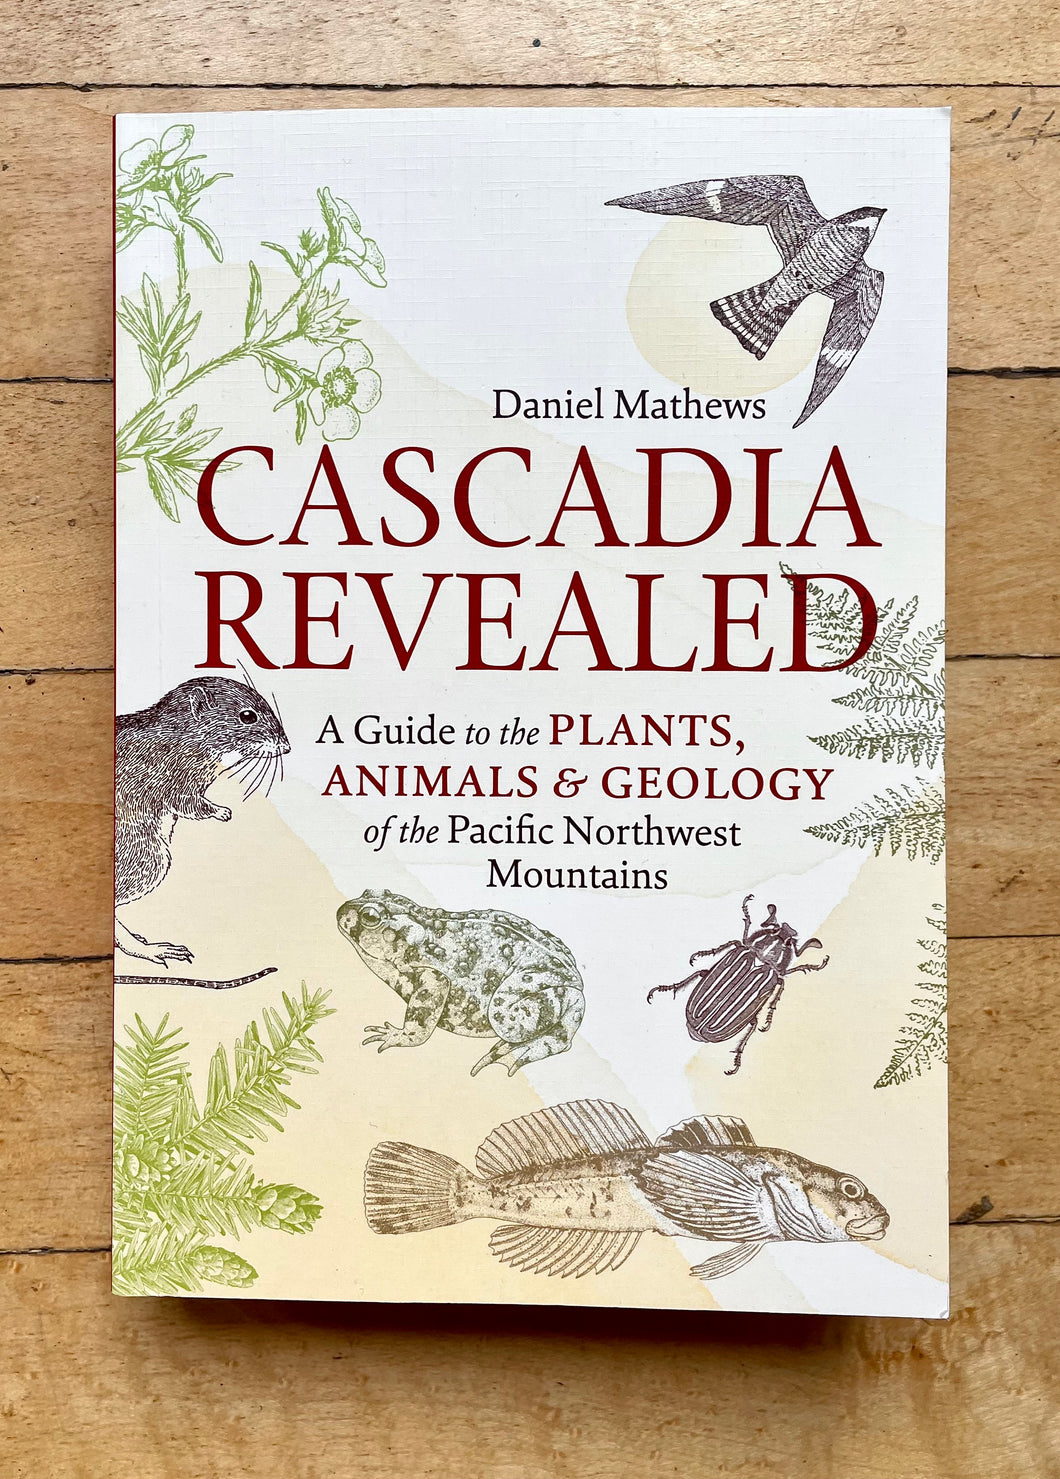 Cascadia Revealed A Guide to the Plants, Animals, and Geology of the Pacific Northwest Mountains Book by Daniel Mathews